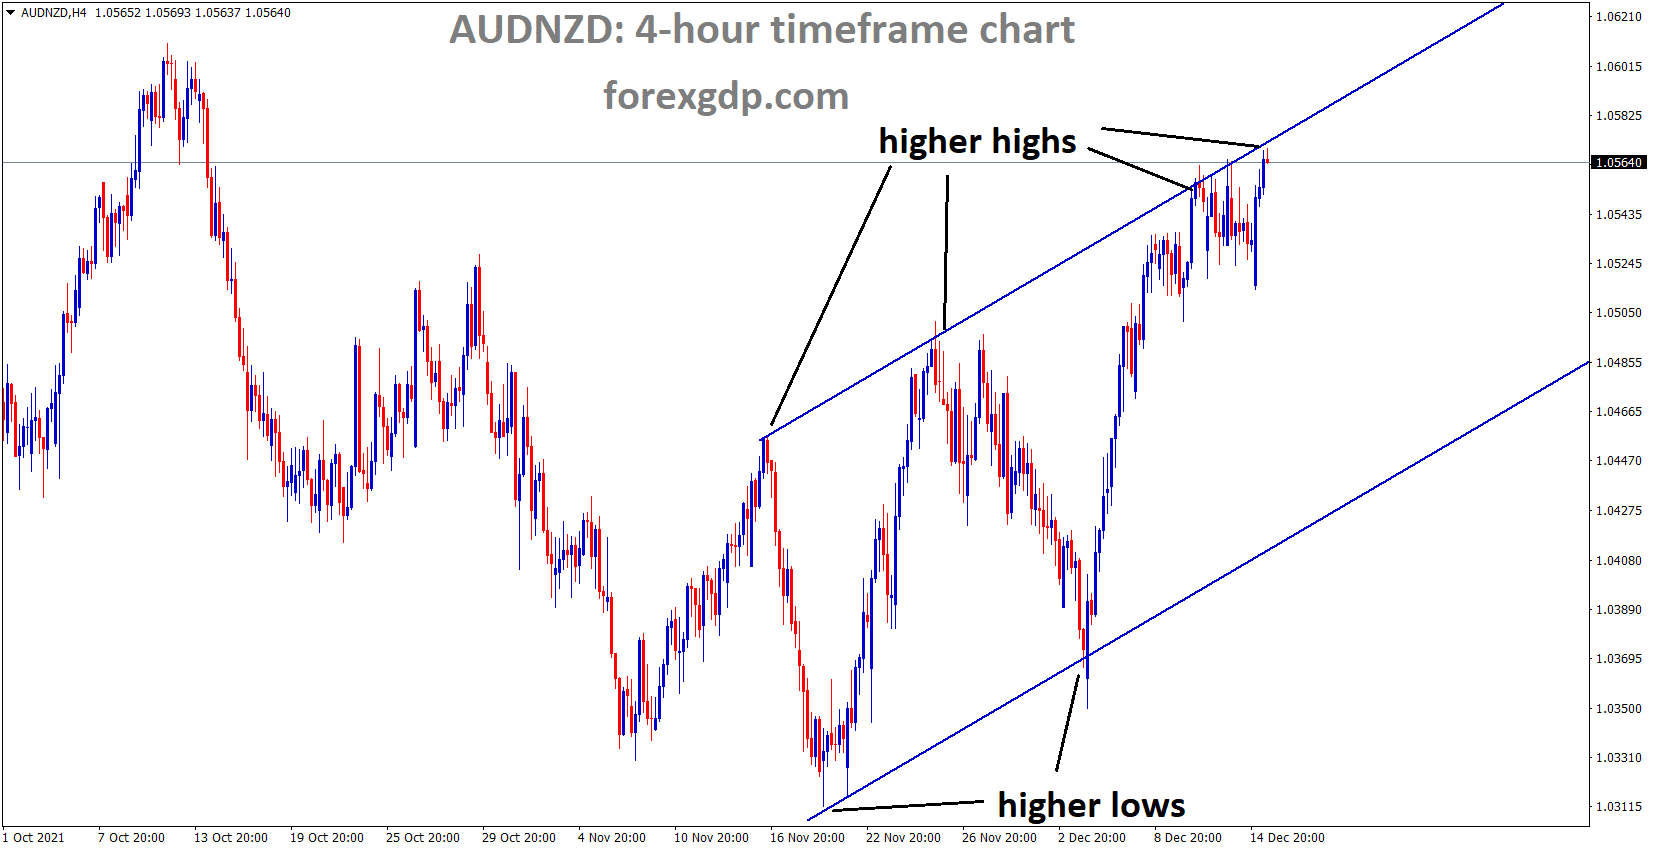 AUDNZD is moving in an Ascending channel and the market reached the higher high area of the channel